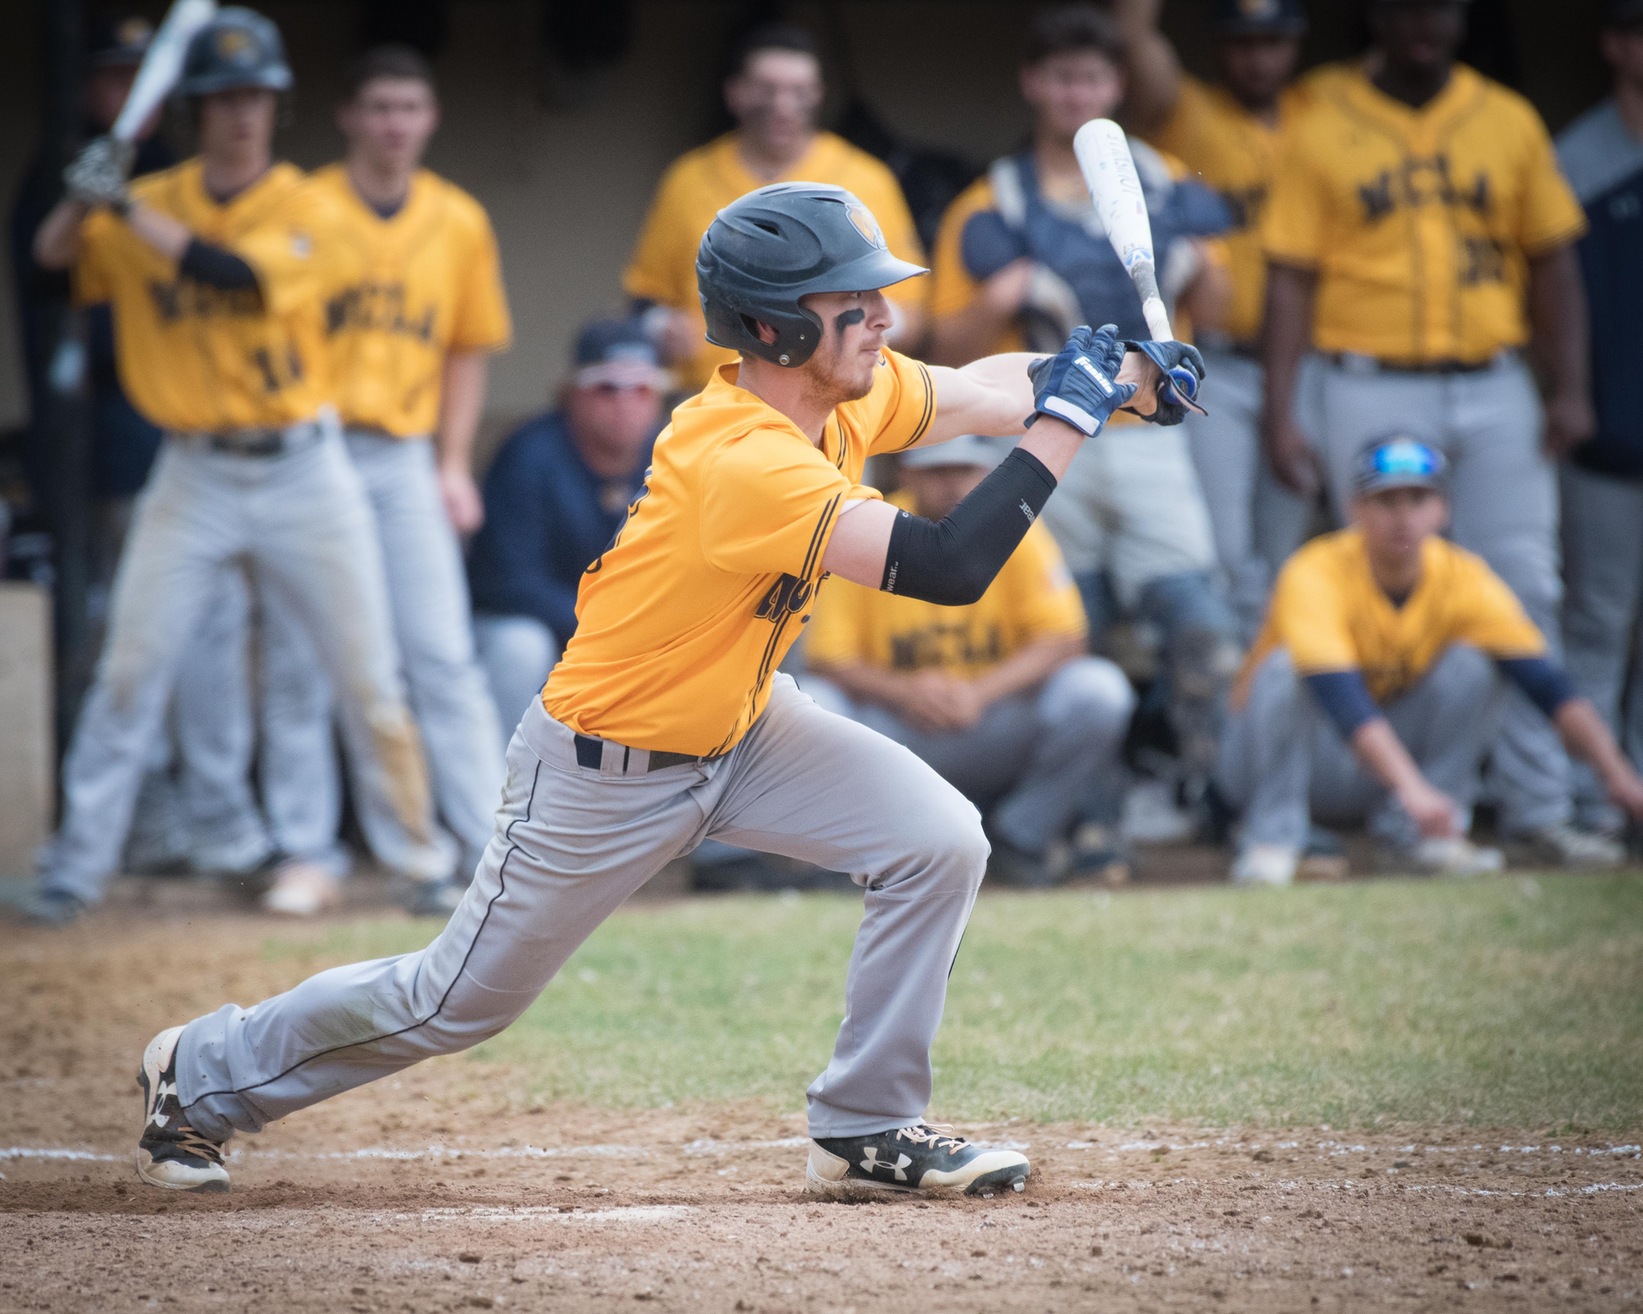 Baseball nipped in game one 3-2, Vikings complete sweep with 5-1 win in nightcap